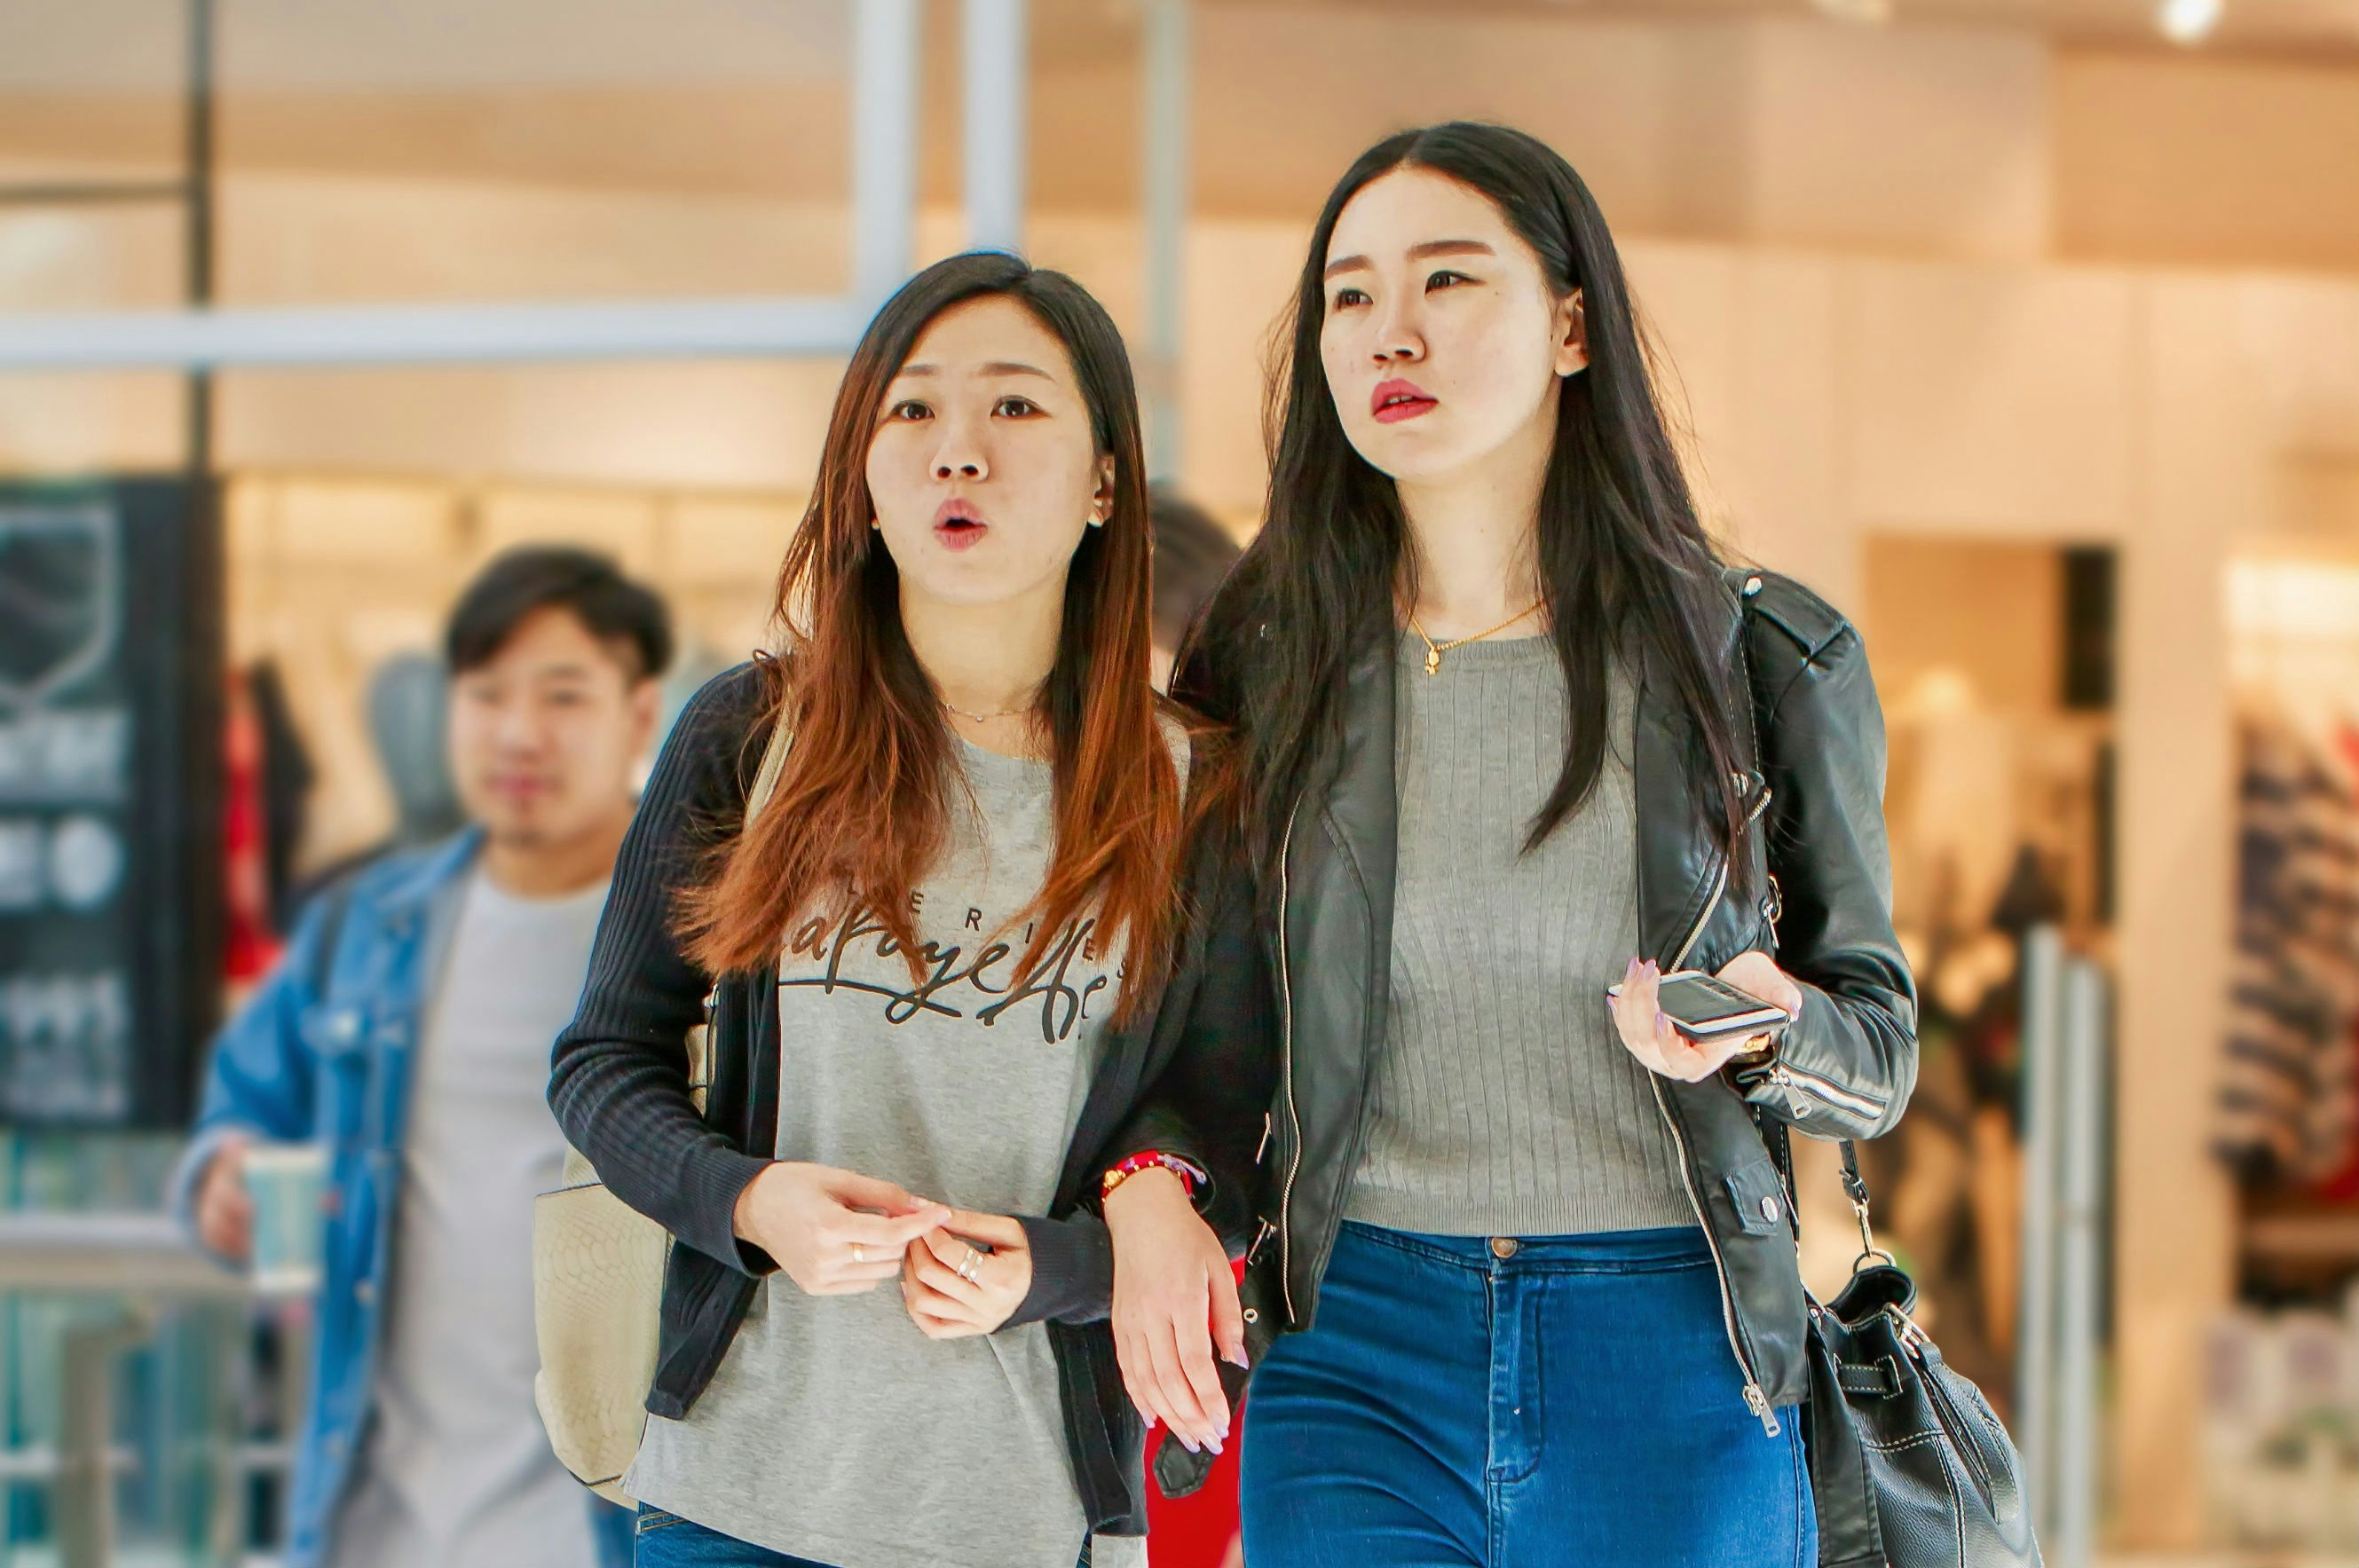 Chinese millennials' desires and purchasing habits differ from those of their Western counterparts. (Shutterstock)